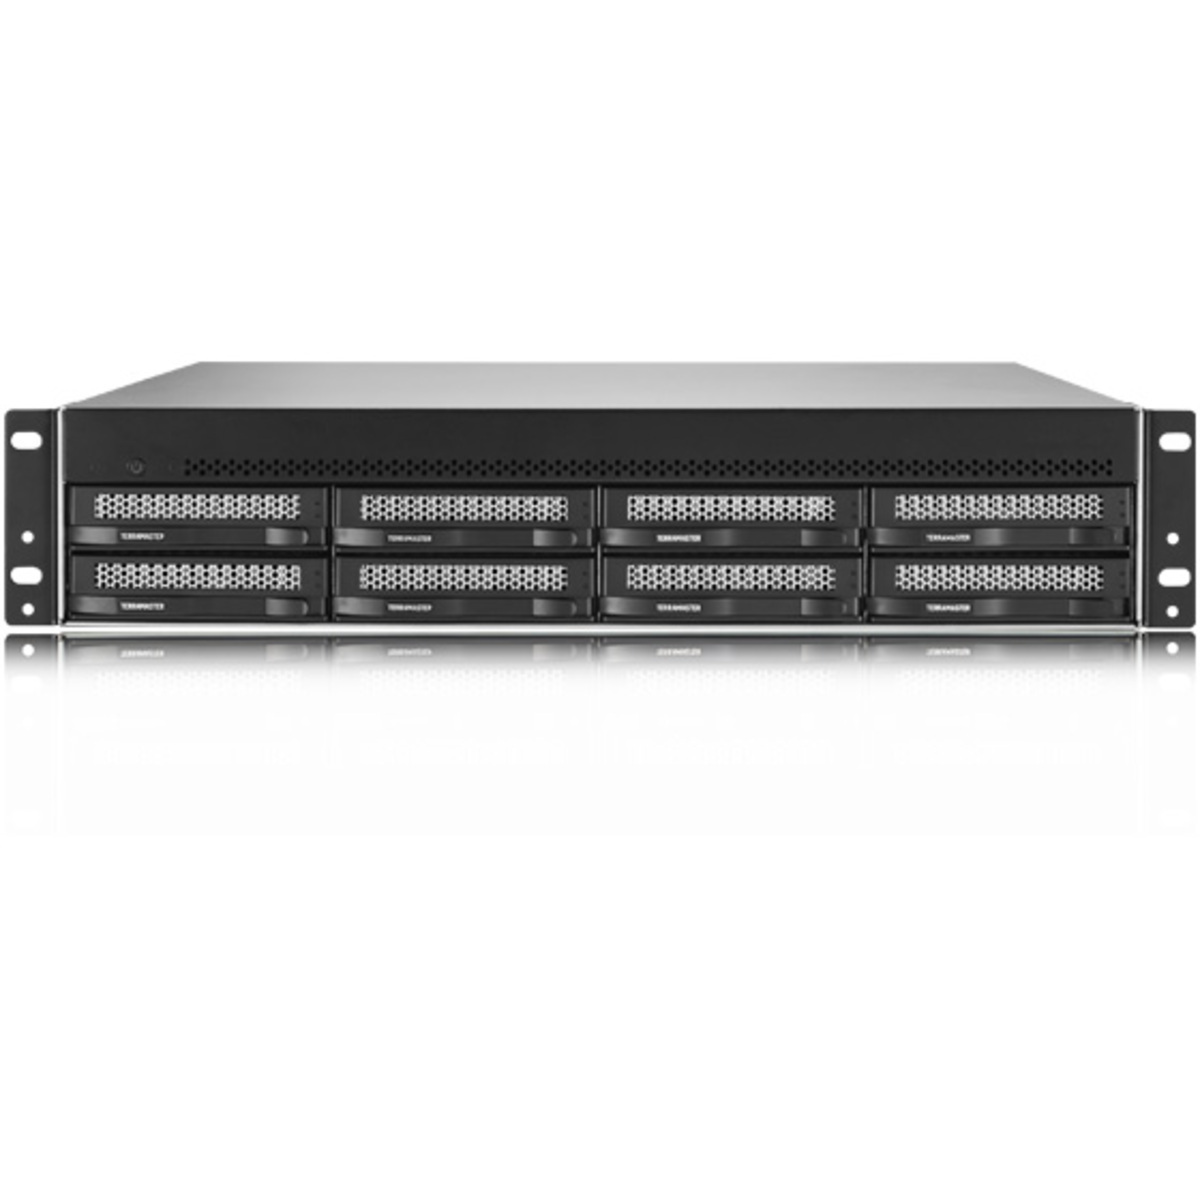 TerraMaster U8-450 140tb 8-Bay RackMount Multimedia / Power User / Business NAS - Network Attached Storage Device 7x20tb Seagate EXOS X20 ST20000NM007D 3.5 7200rpm SATA 6Gb/s HDD ENTERPRISE Class Drives Installed - Burn-In Tested U8-450